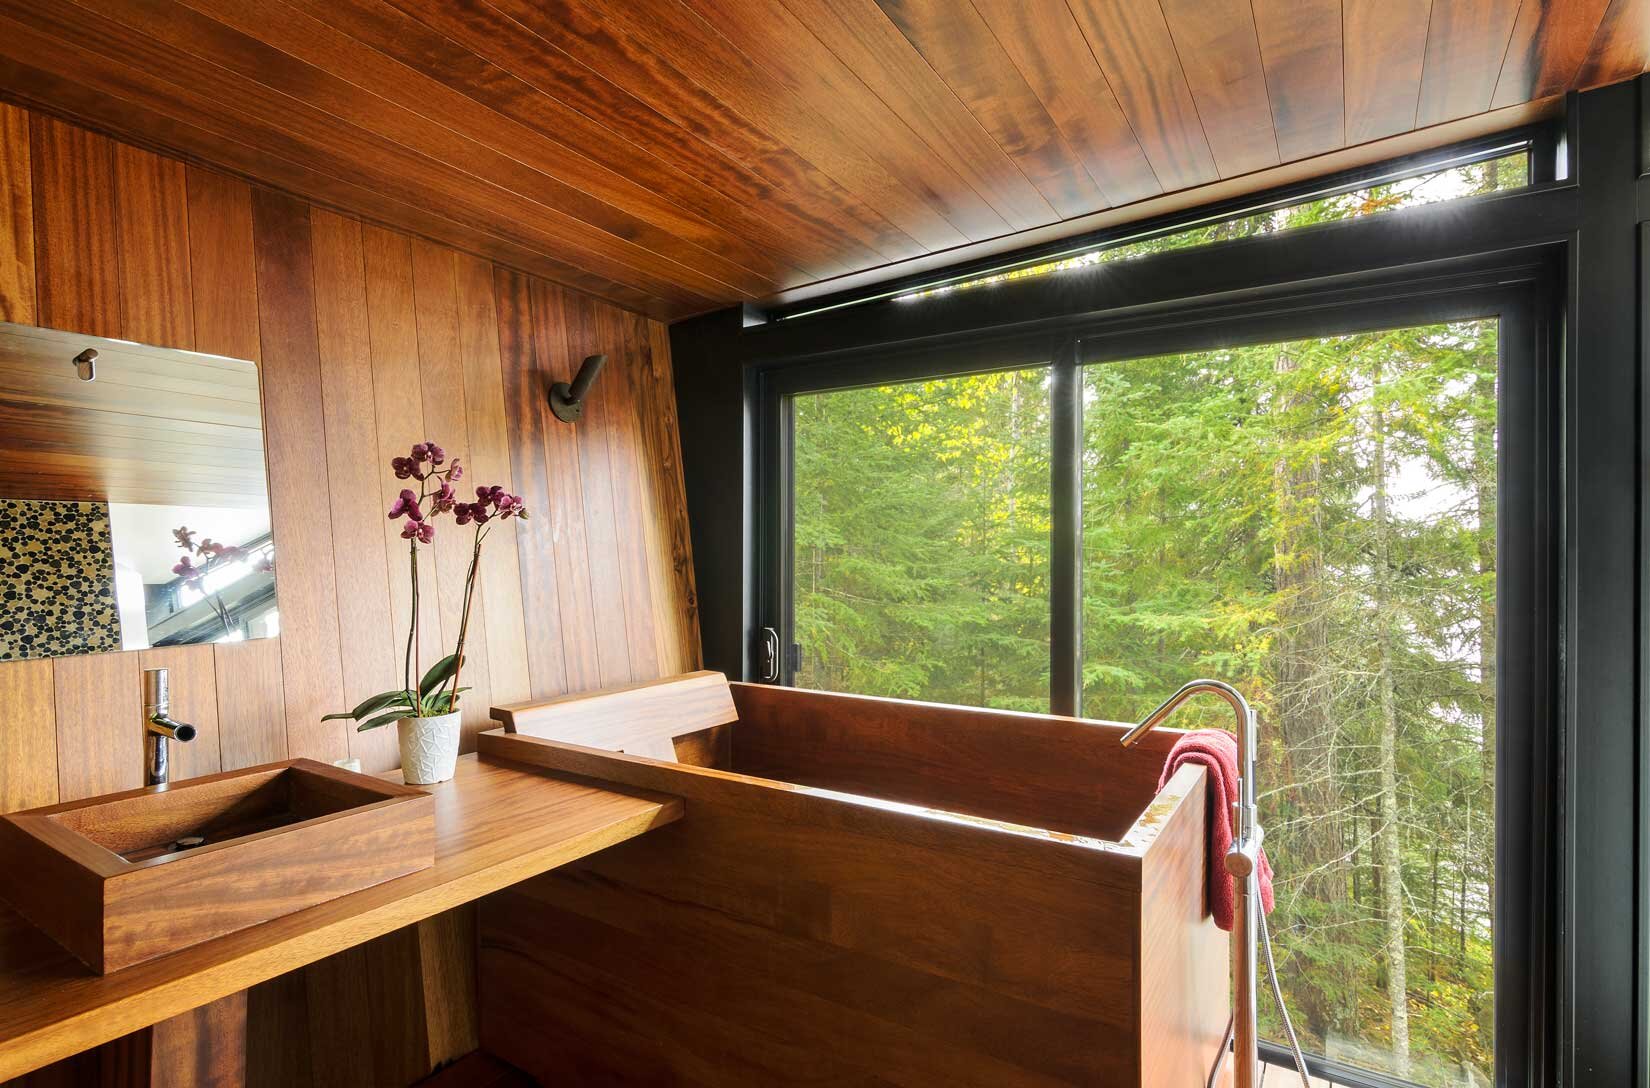  The Batiste’s wooden bath (and sink) looking right at home. This Canadian dwelling was built by architect Charlie Lazor. Photo by Pete VonDeLinde. 